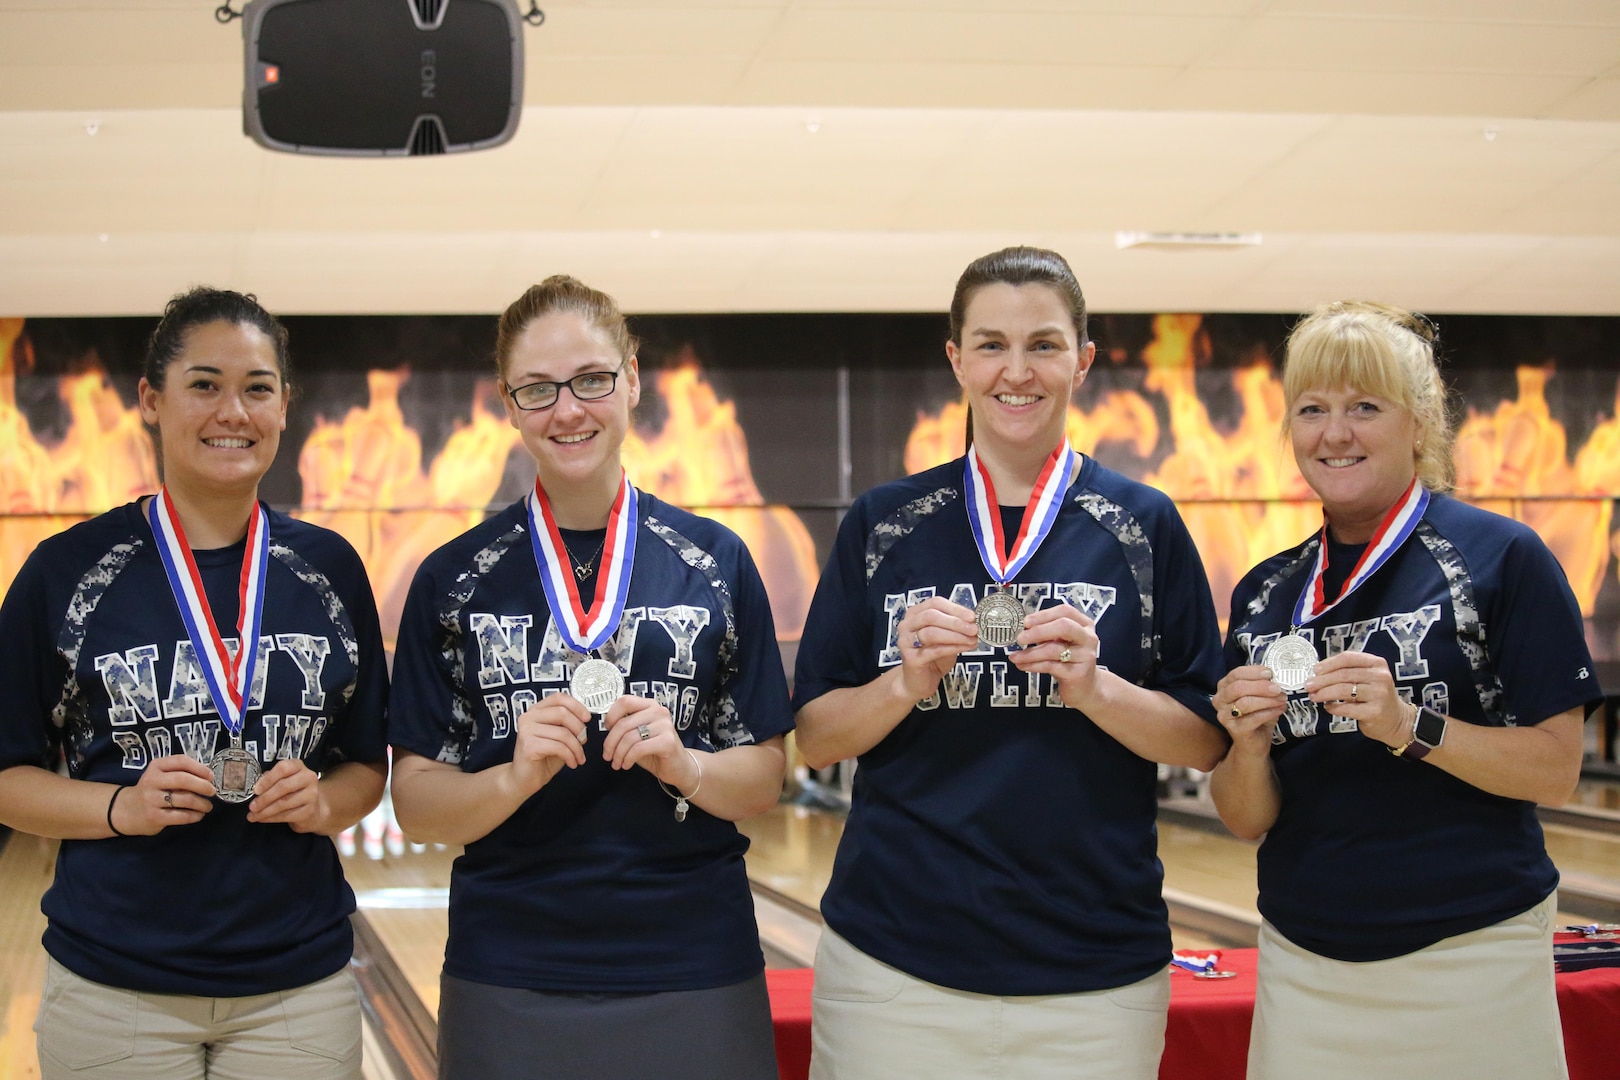 Navy Women take Team Silver at the Armed Forces Bowling Championship hosted at Marine Corps Base Camp Pendleton, California from 5-8 May at the Leatherneck Lanes. Pictured is: Petty Officer 1st Class Melanie Griffith, USS Essex; Petty Officer 1st Class Ashley Scott, Navy Reserve COM; Senior Chief Petty Officer Debbee Simon, San Diego, CA; Cmdr. 	Tamara Tuttle, Groton, Conn.